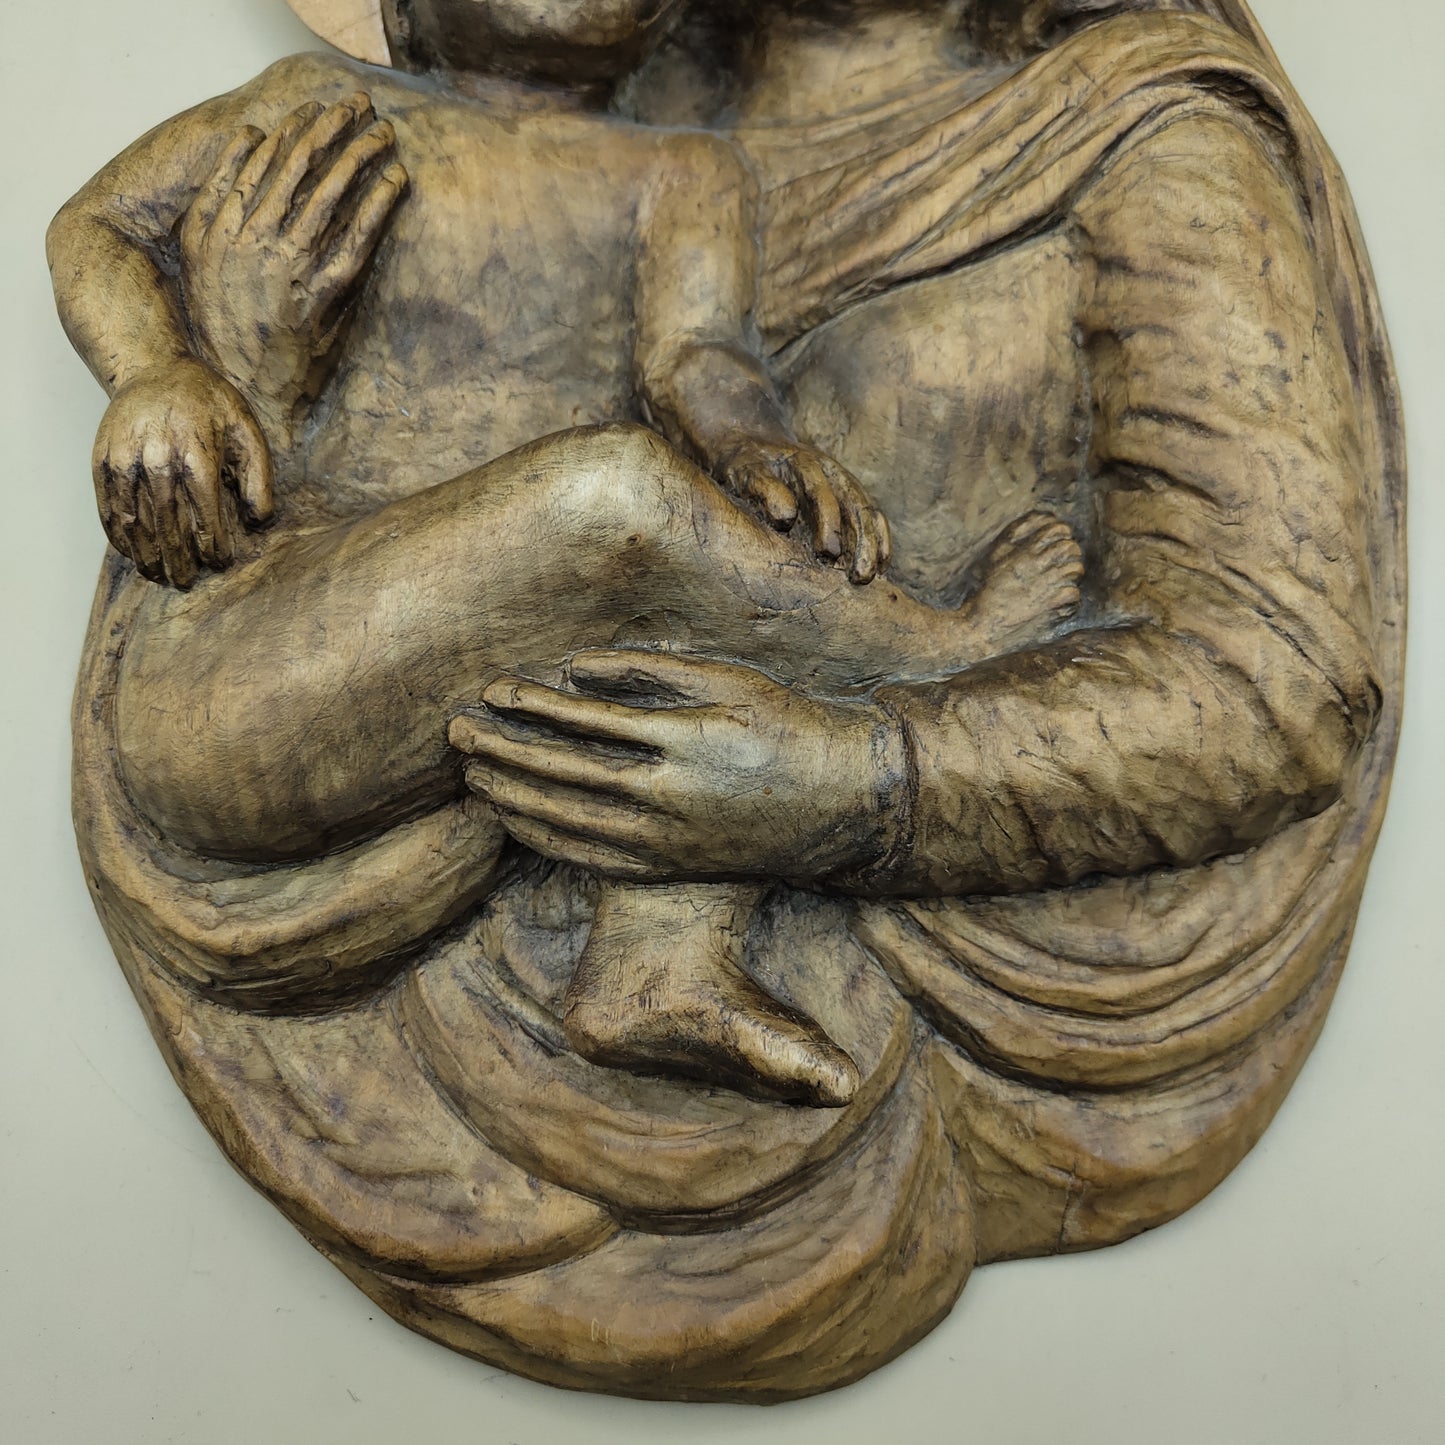 Handmade wooden sculpture of Madonna with child from the 1950s